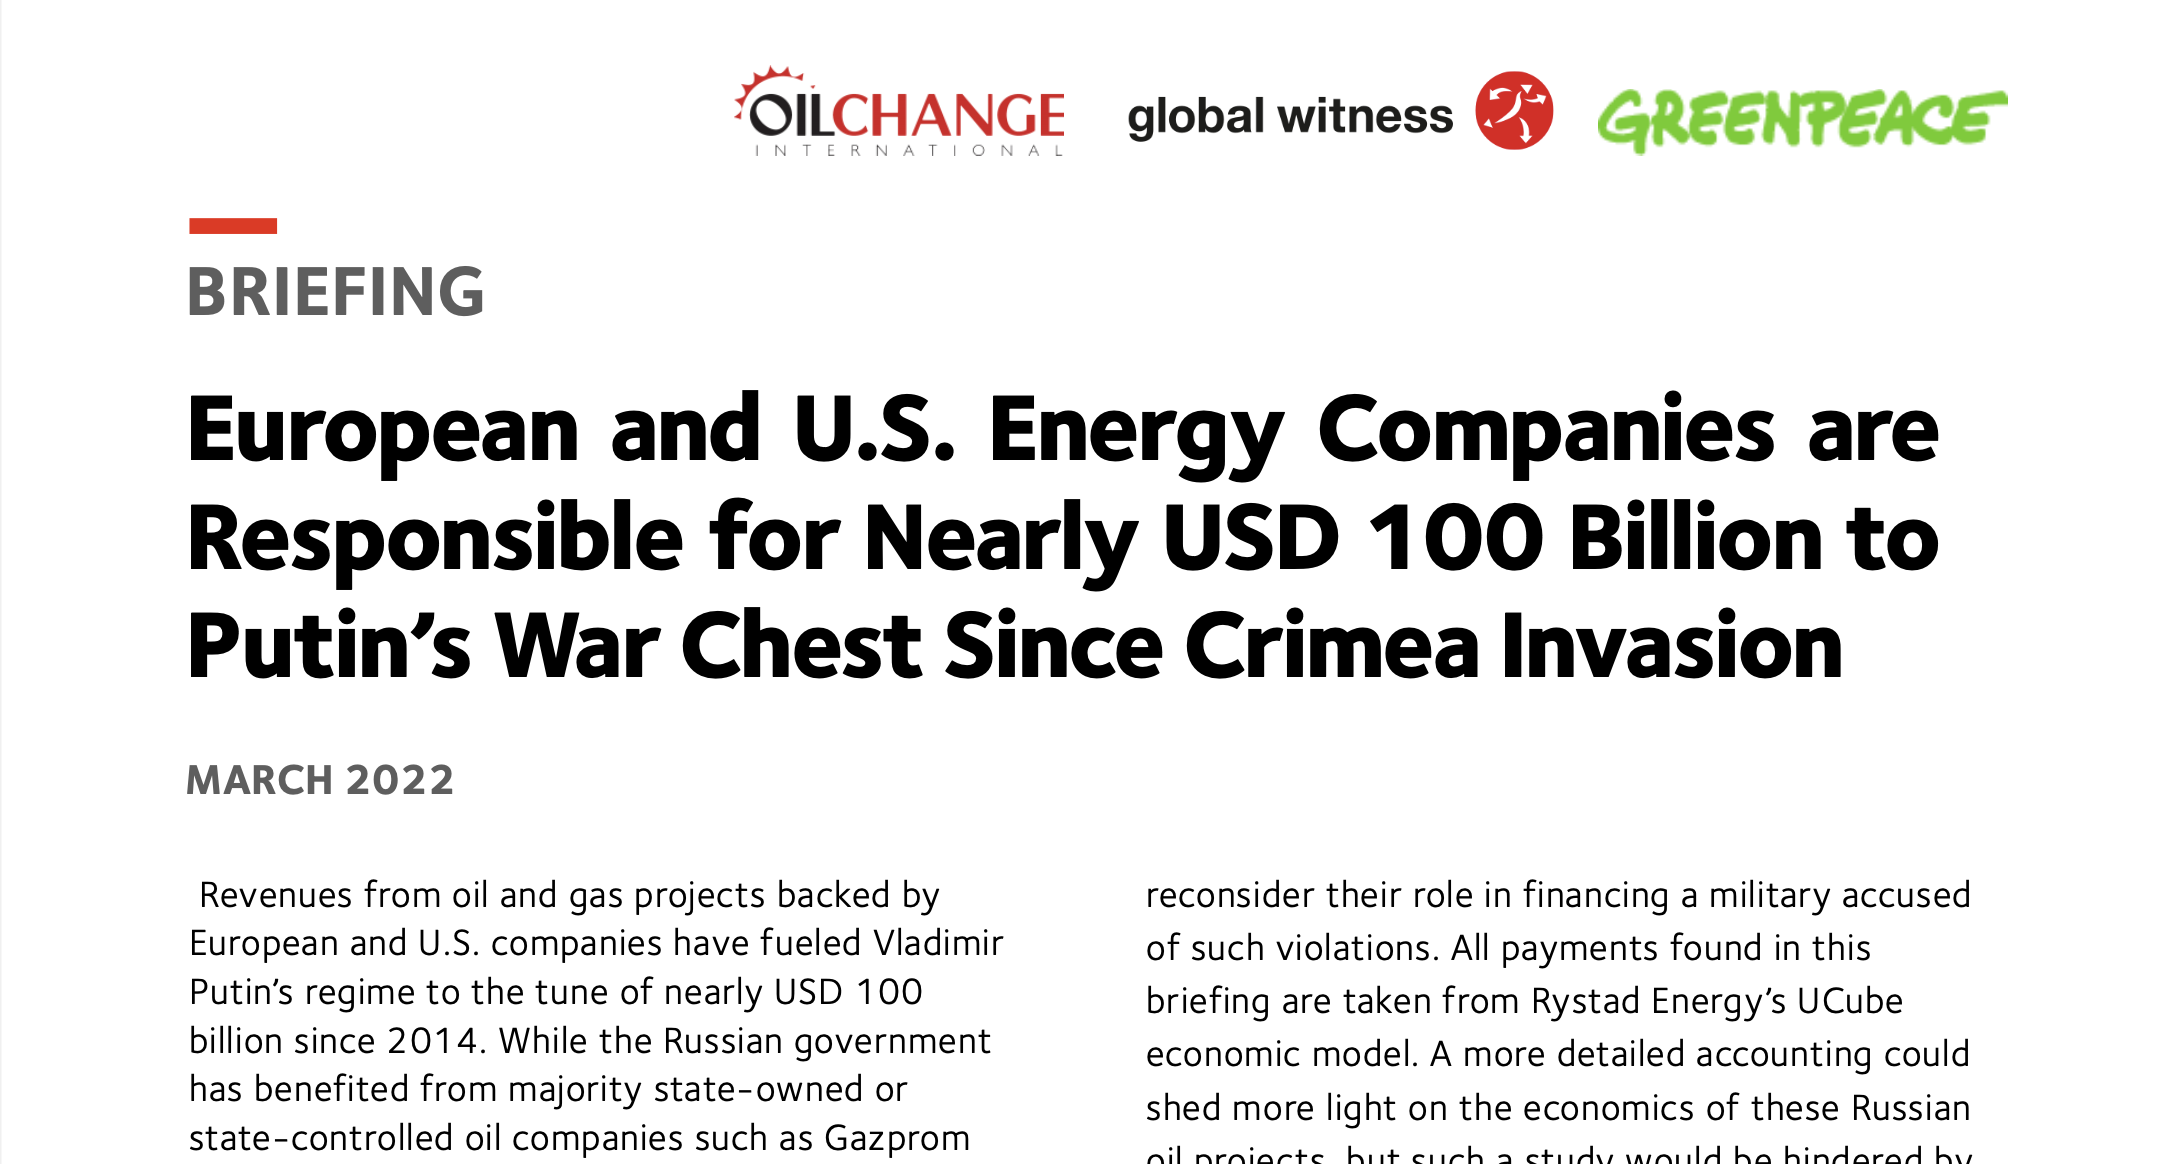 European and U.S. Energy Companies are Responsible for Nearly USD 100 Billion to Putin’s War Chest Since Crimea Invasion